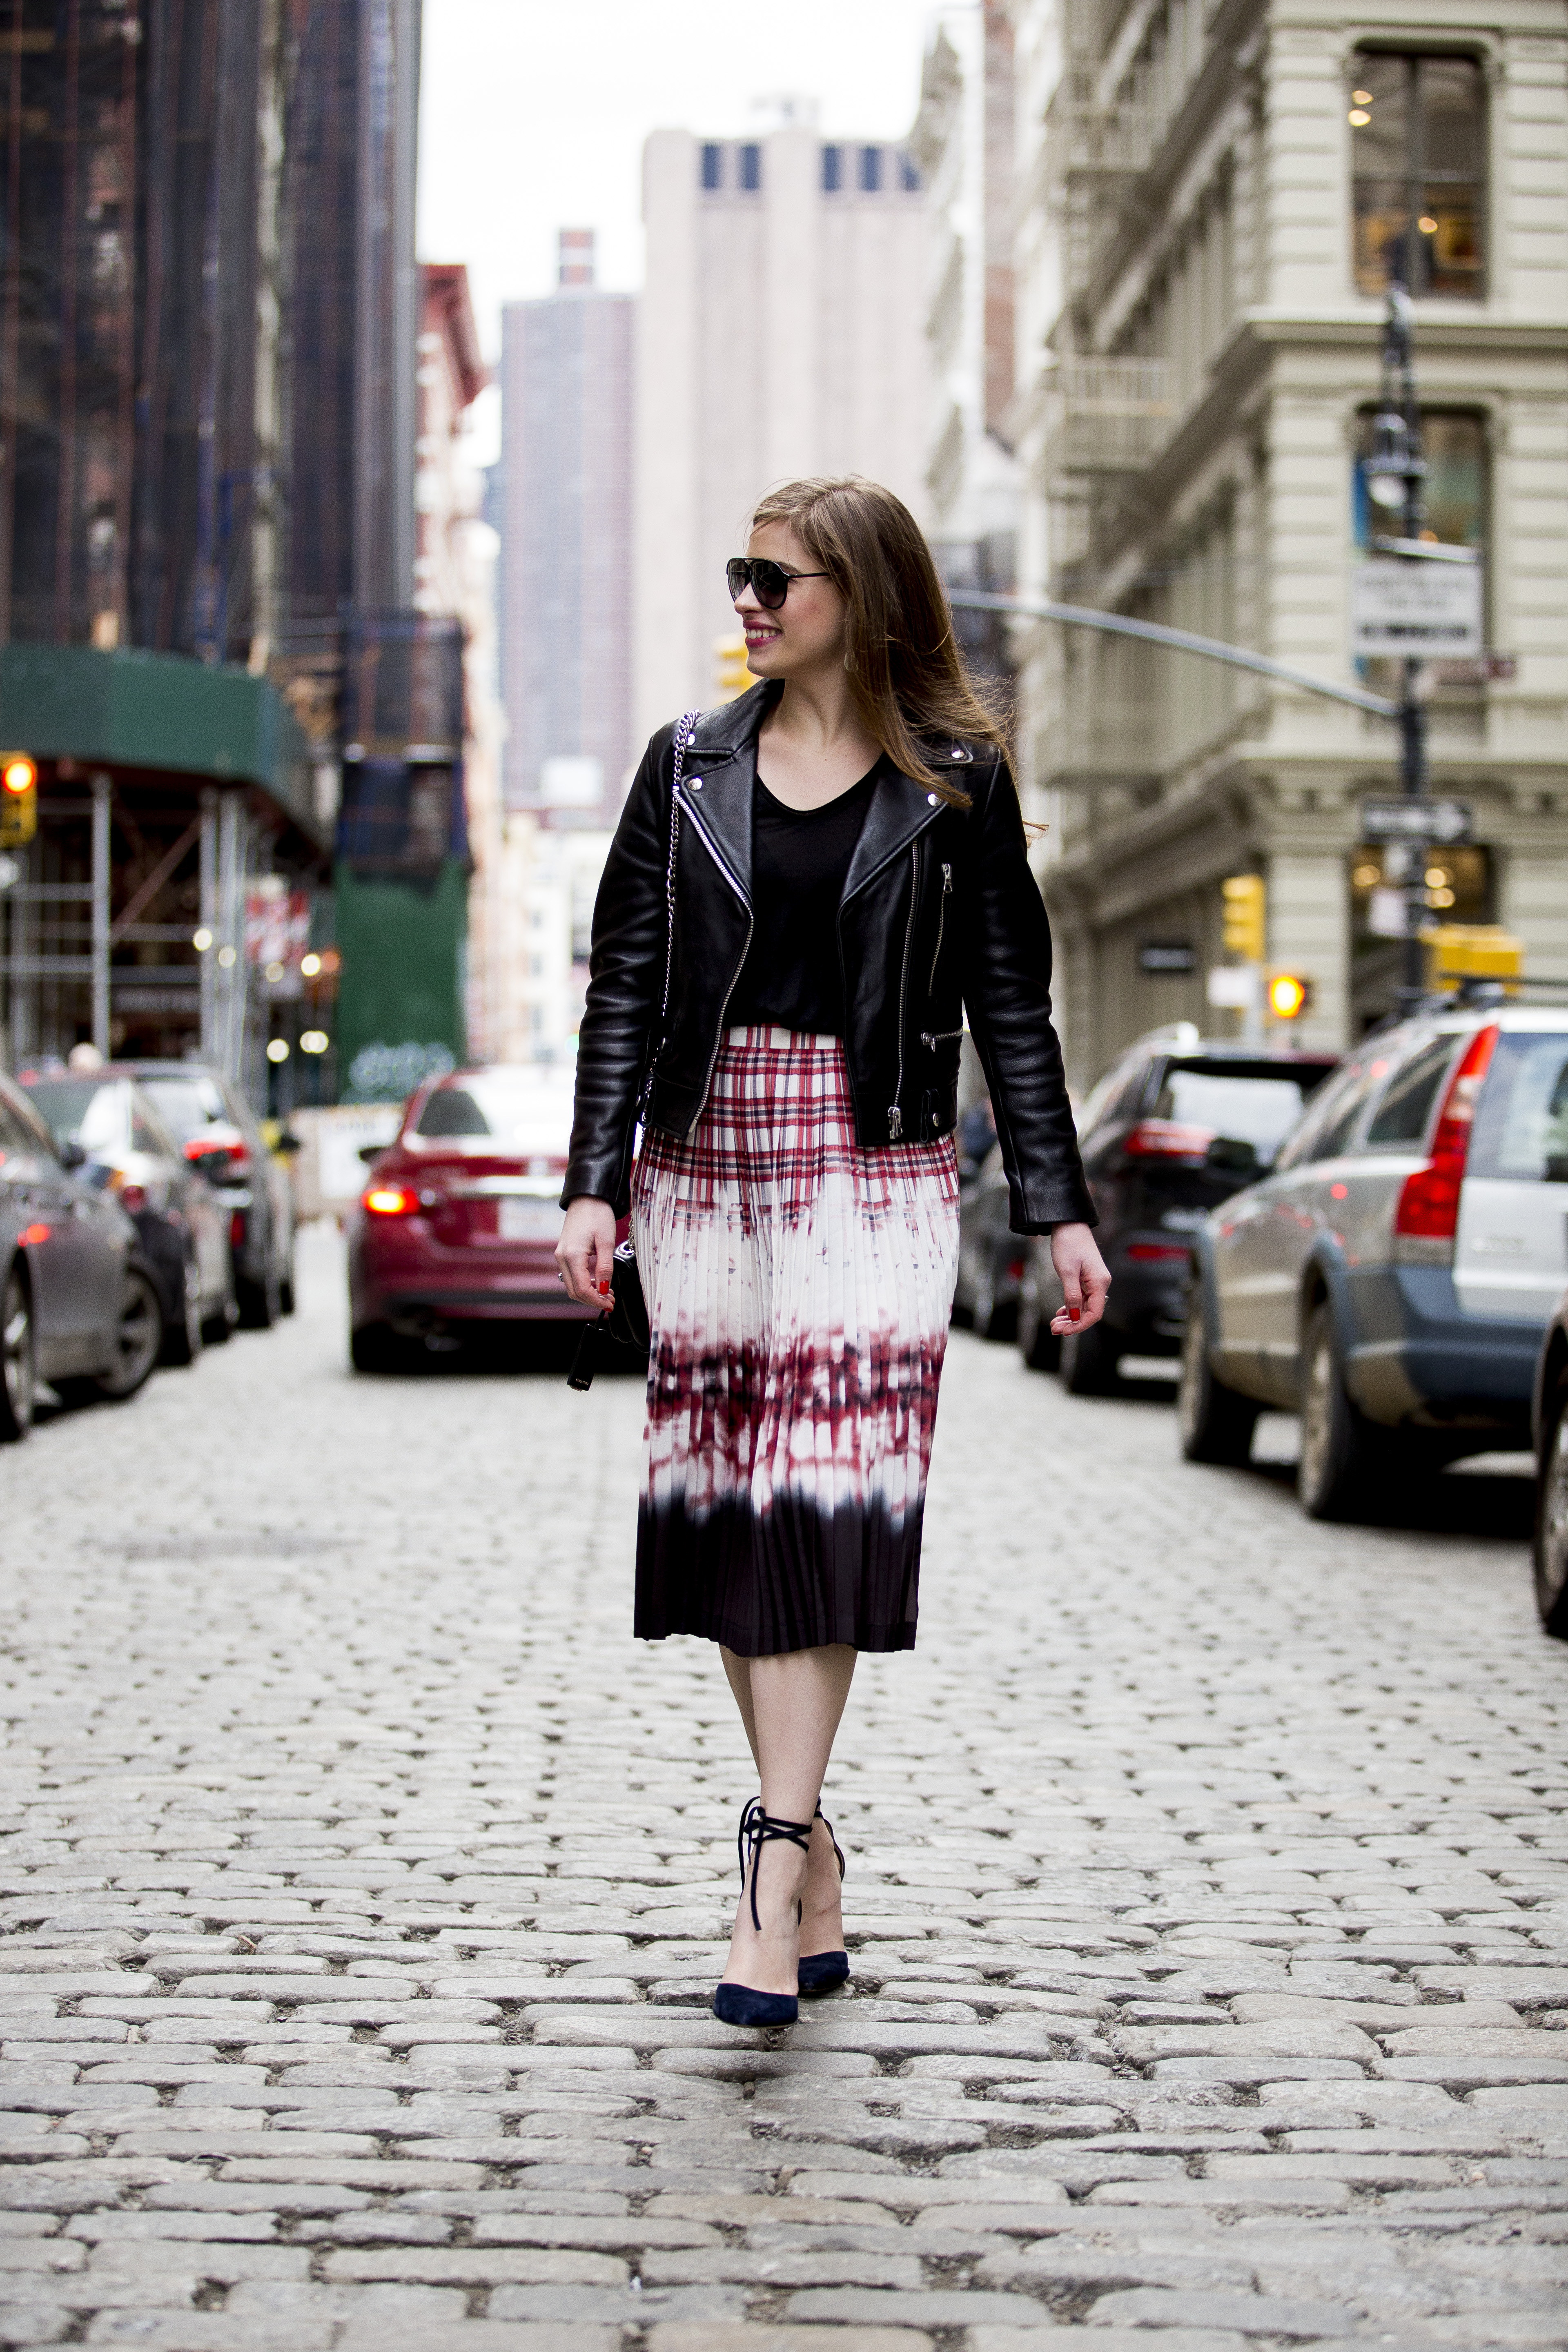 Woman walking down a cobblestone street in Manhattan wearing a black leather jacket, black t-shirt, red, black & white printed skirt, navy heels and black sunglasses. She has brown hair